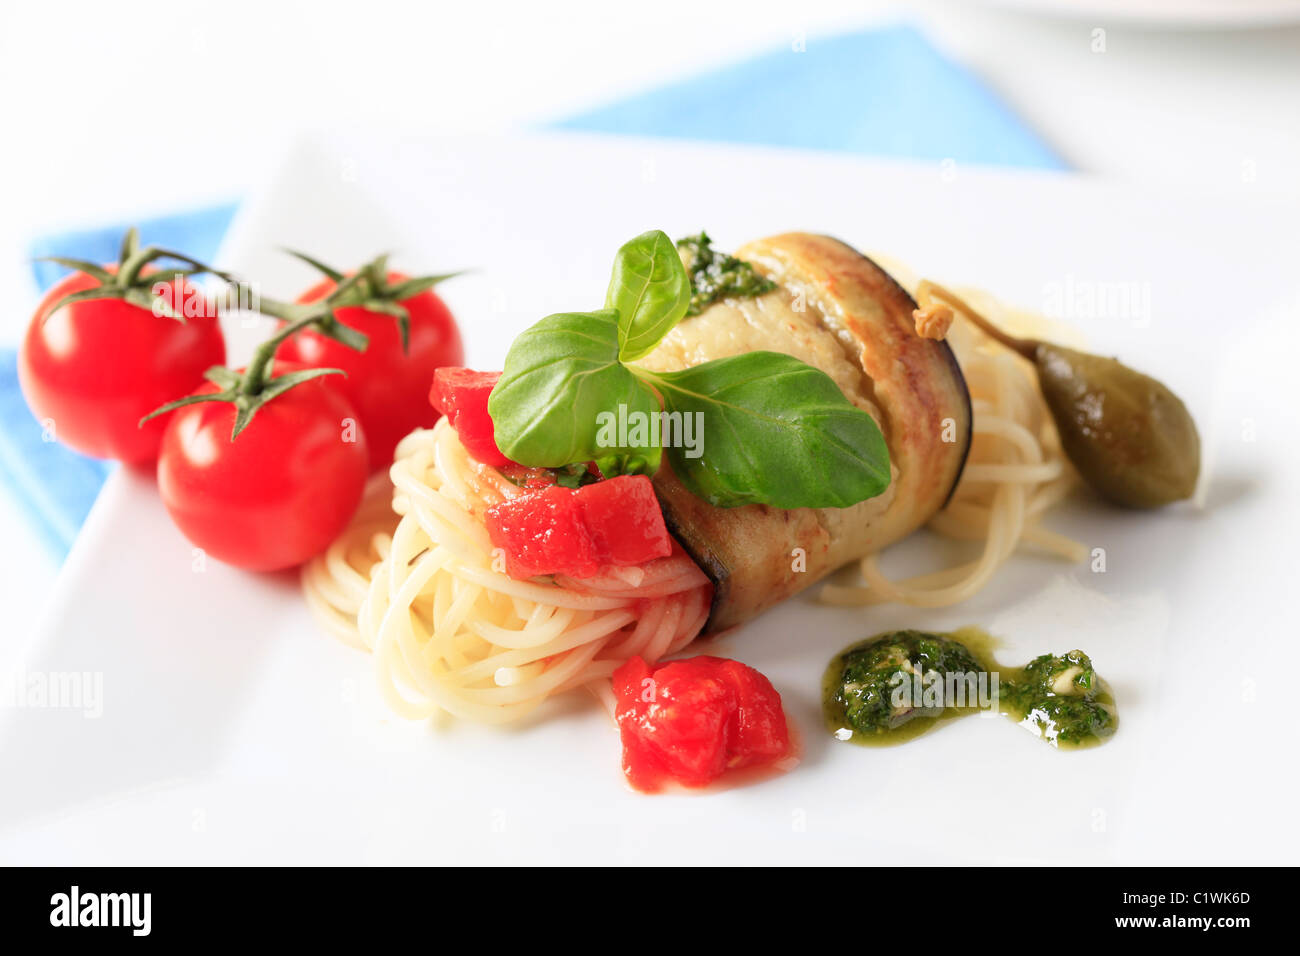 Spaghetti wrapped in a slice of grilled aubergine Stock Photo